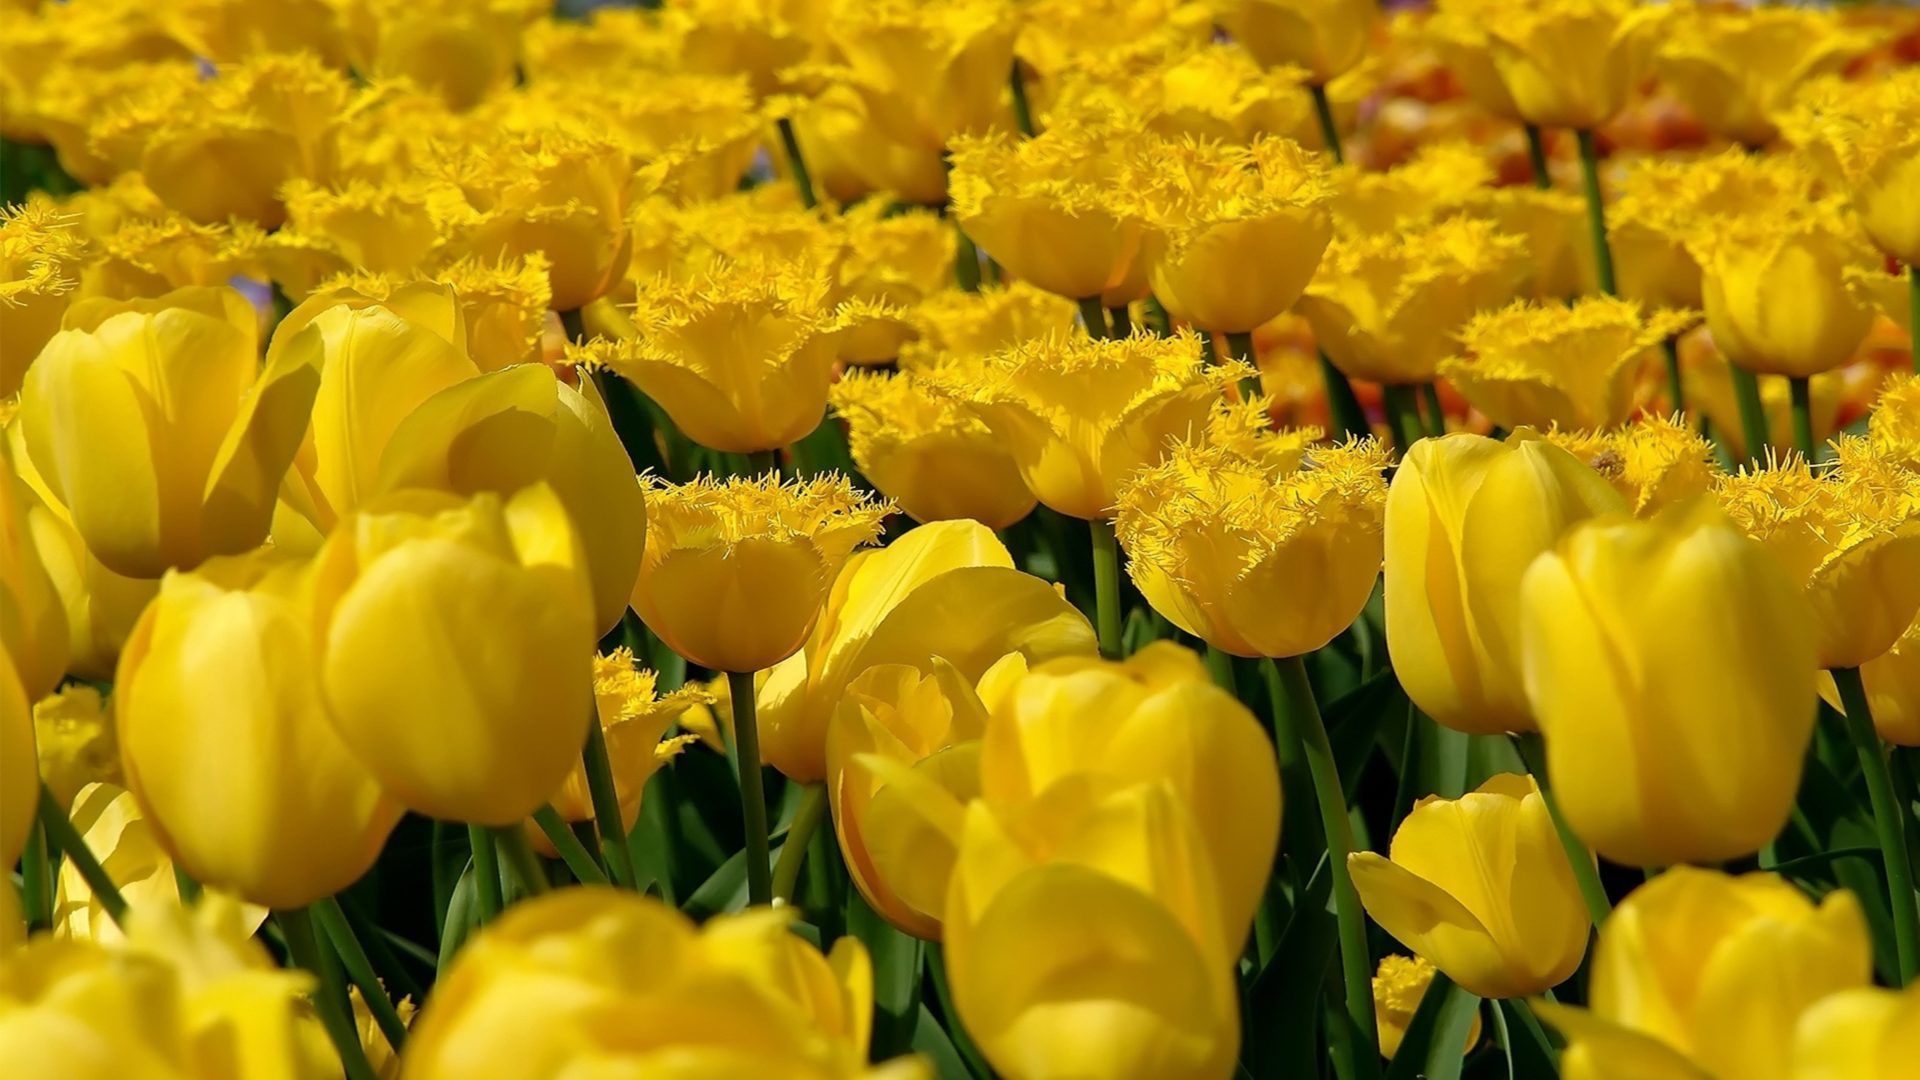 A field of yellow tulips in bloom. - Tulip